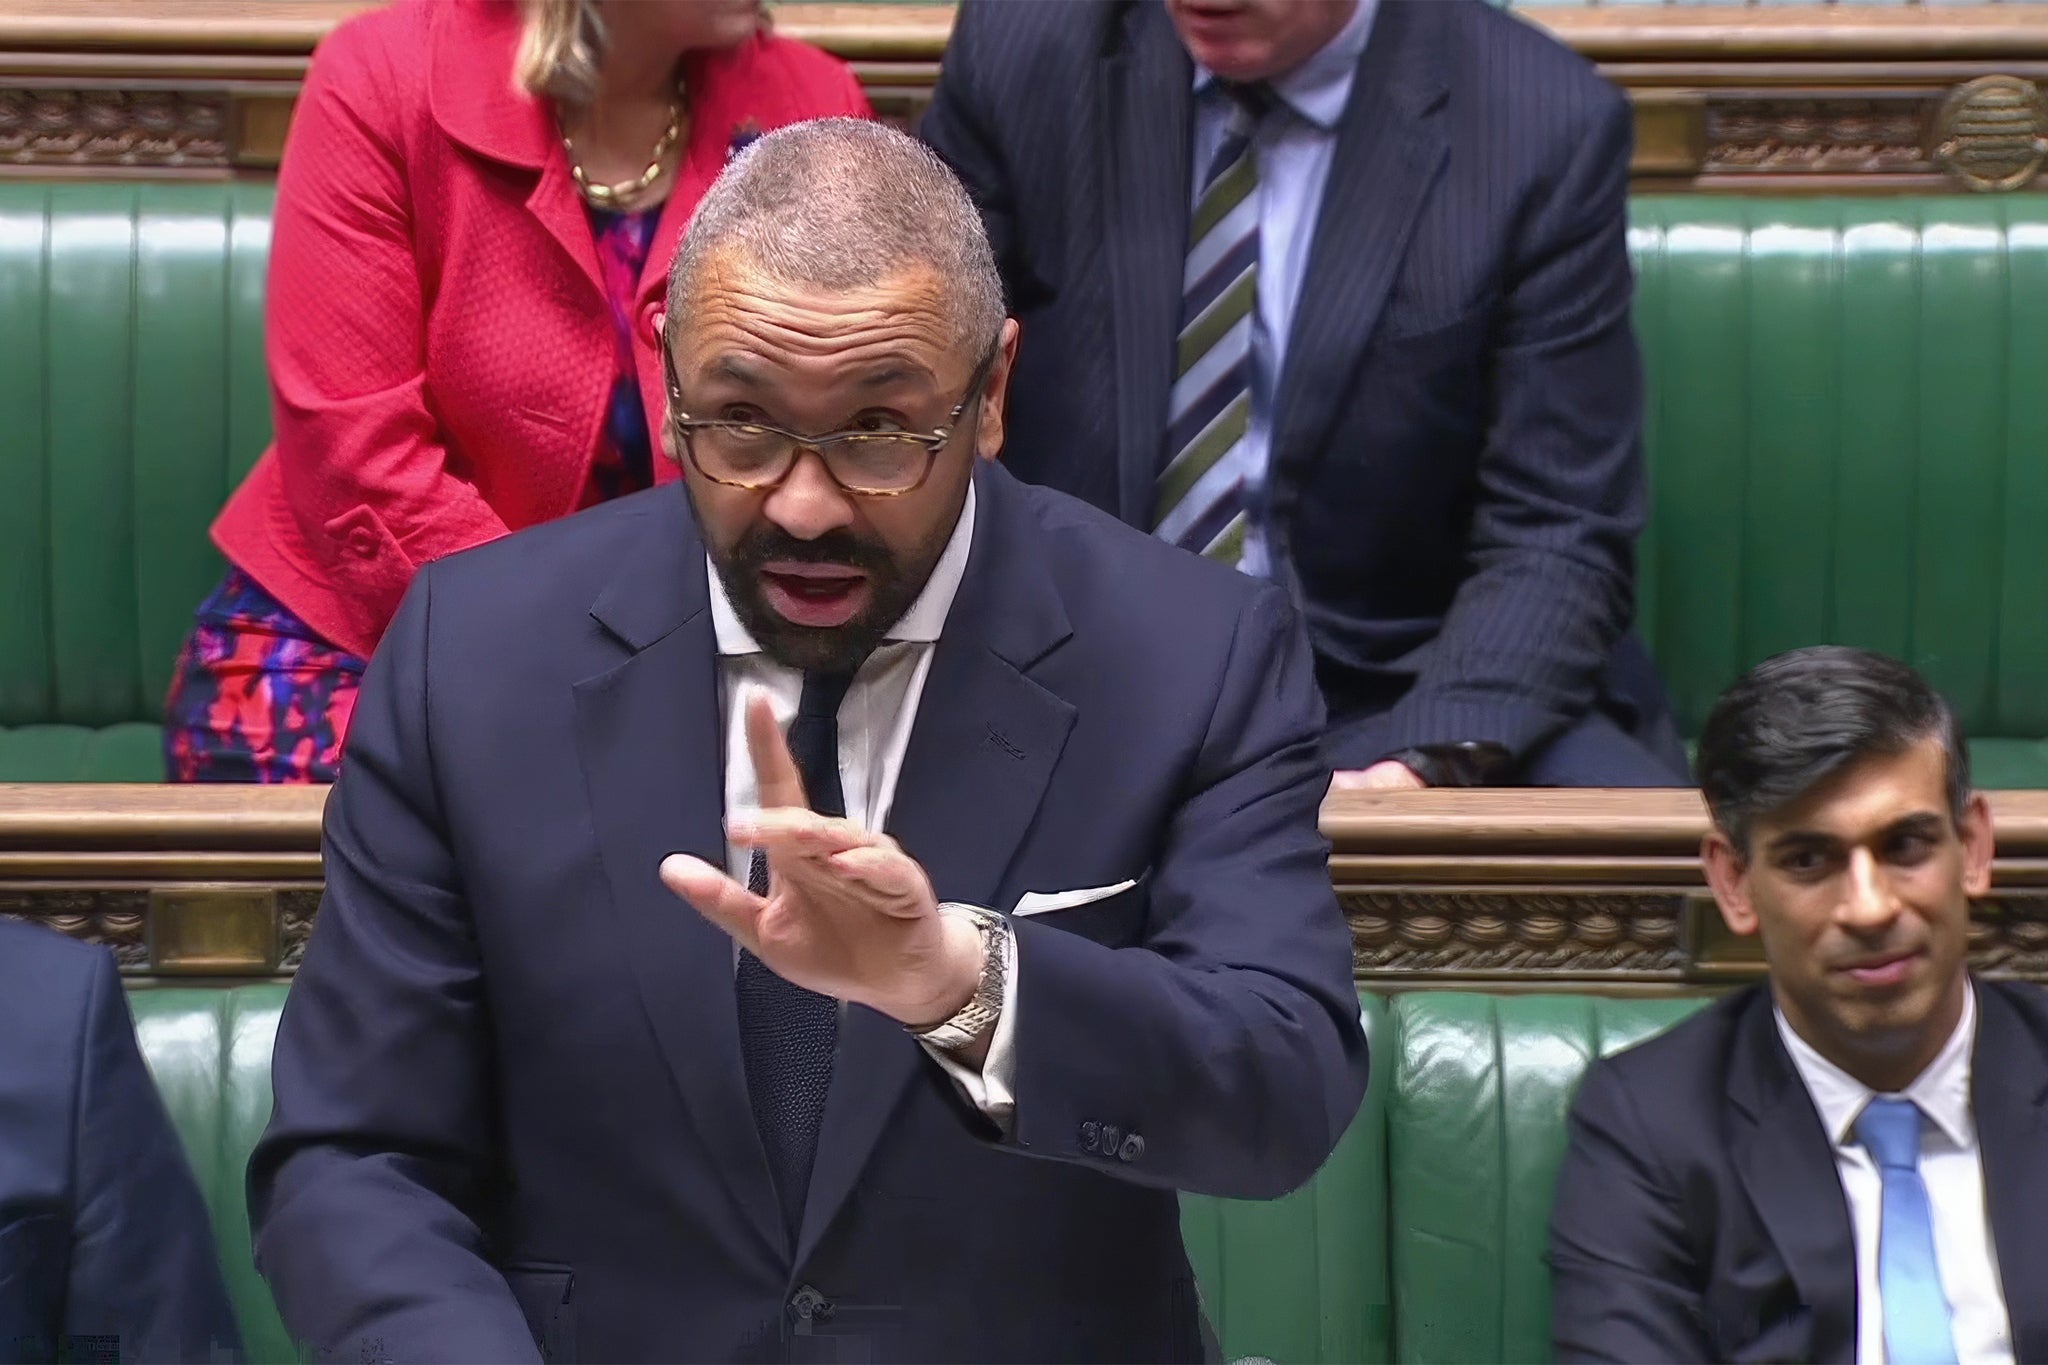 Yesterday, James Cleverly, the home secretary, slipped out a statement announcing the new migrant income threshold had been revised down, to £29,000